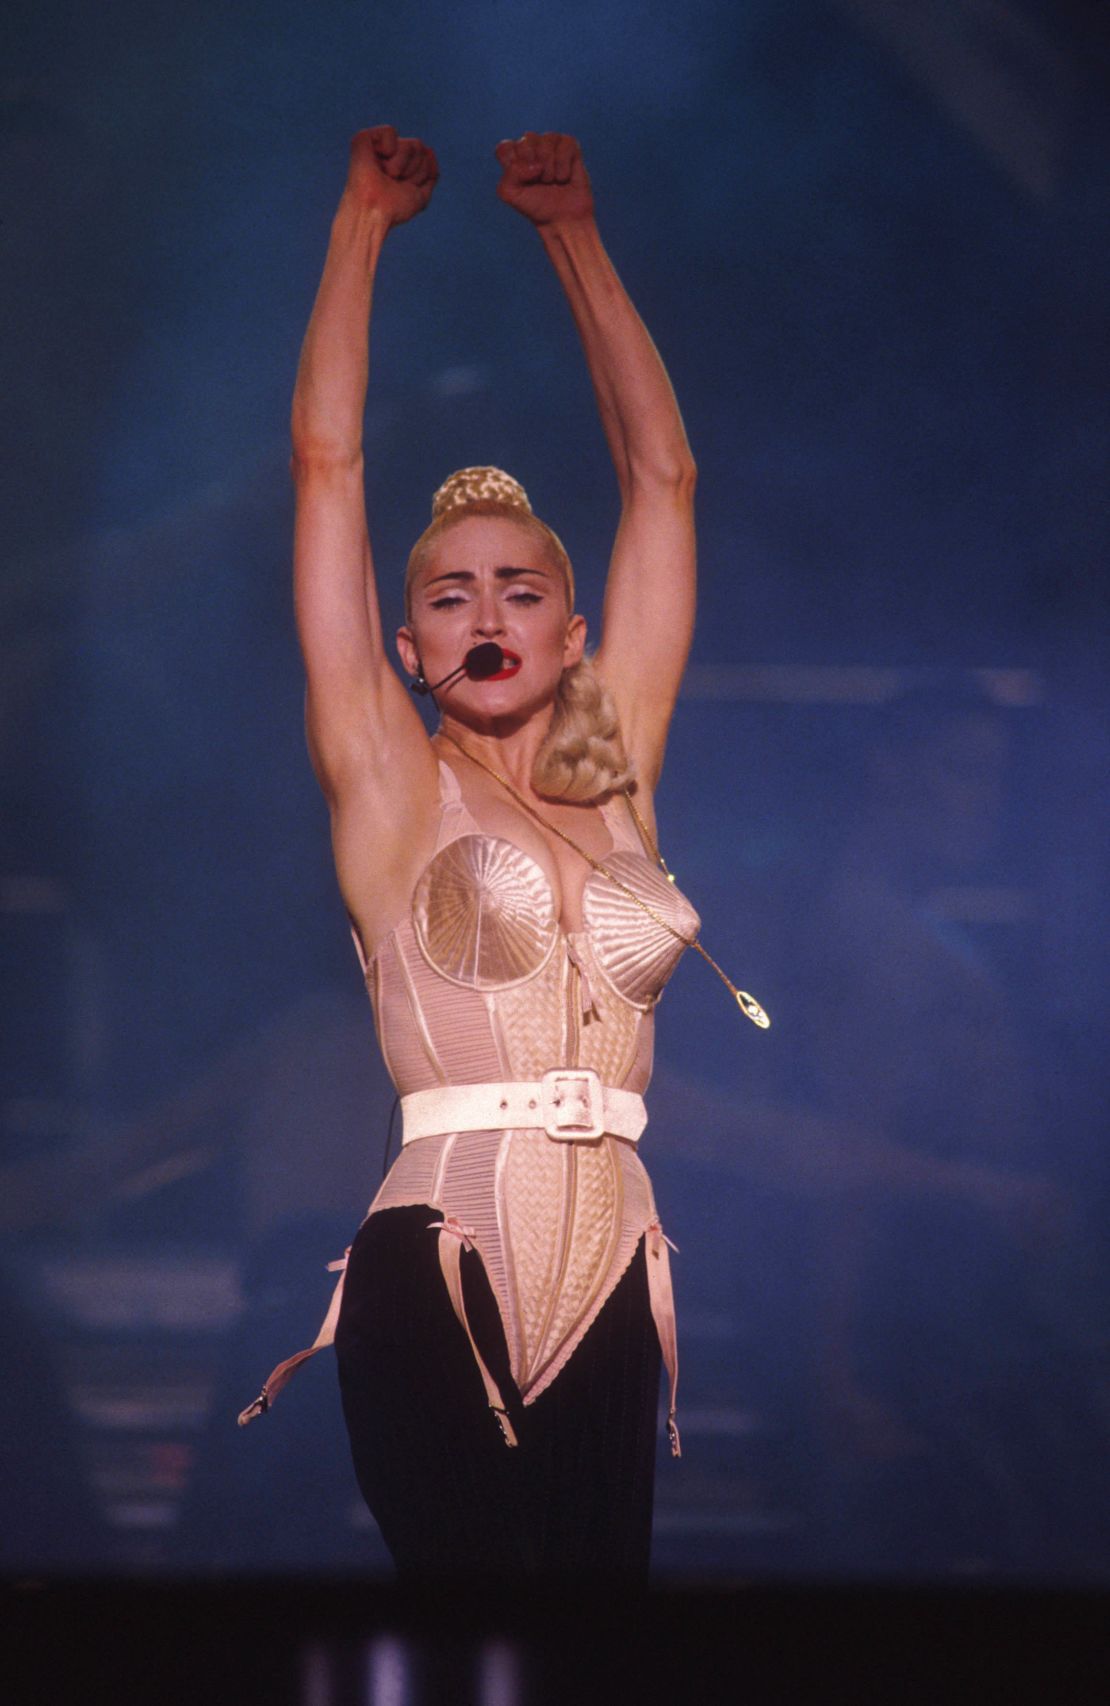 Madonna performing in her cone shaped bra from the Blond Ambition tour.